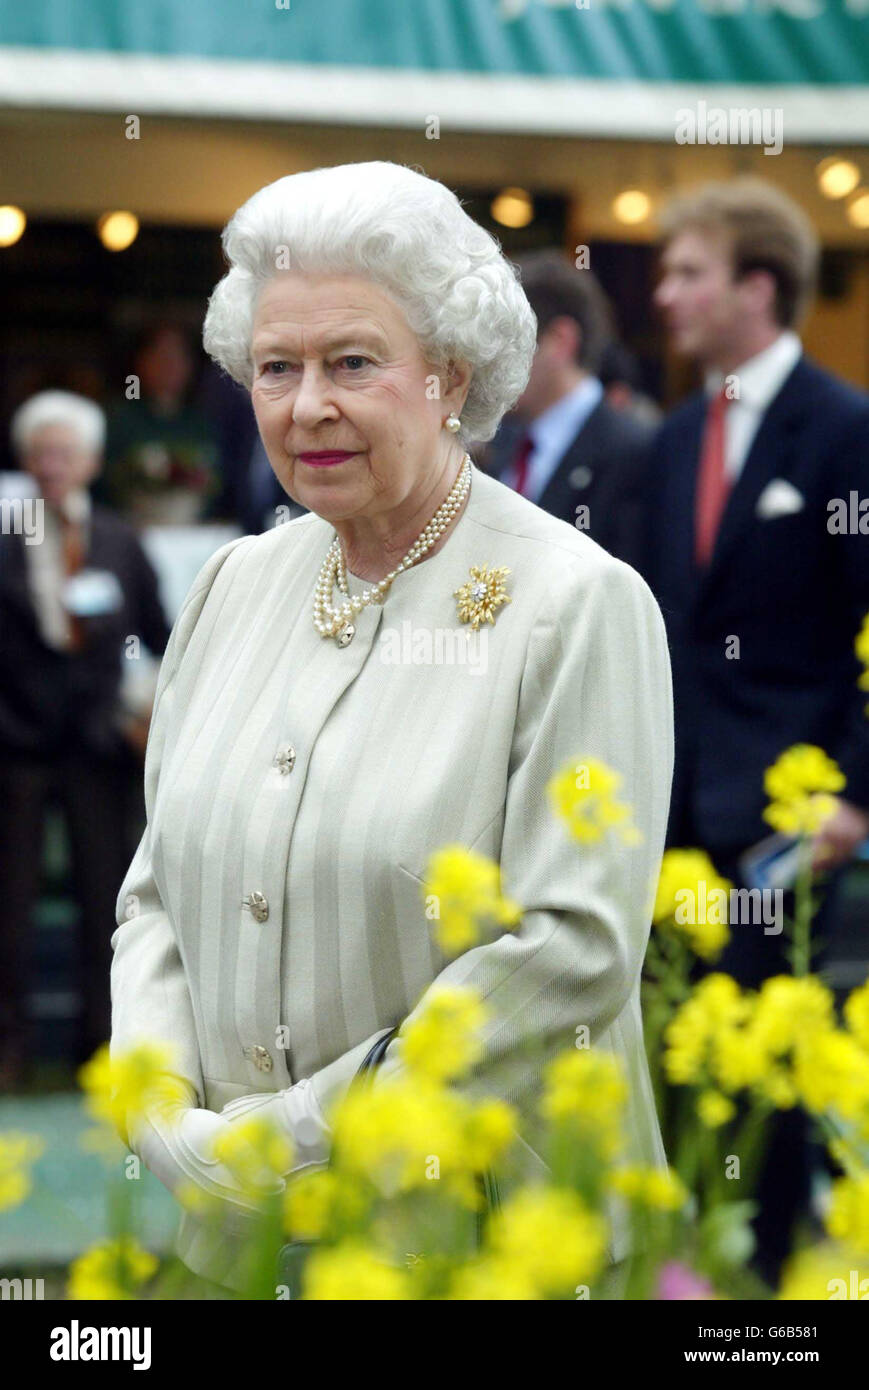 Britain's Queen Elizabeth II visits the Royal Horticultural Society's Chelsea Flower Show in London. Stock Photo